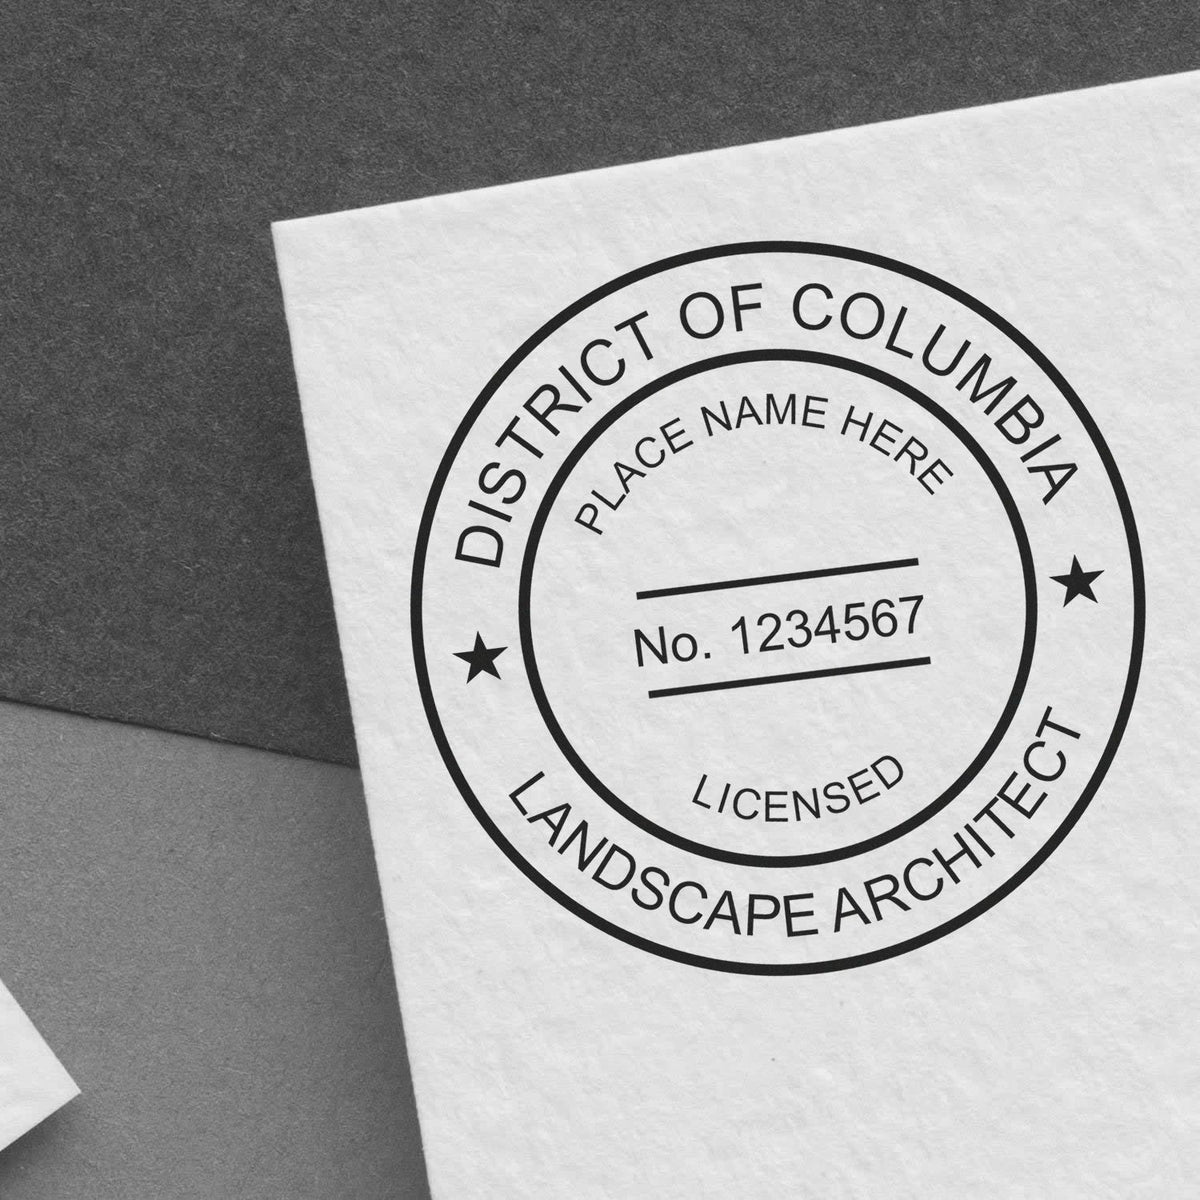 Premium MaxLight Pre-Inked District of Columbia Landscape Architectural Stamp in use photo showing a stamped imprint of the Premium MaxLight Pre-Inked District of Columbia Landscape Architectural Stamp